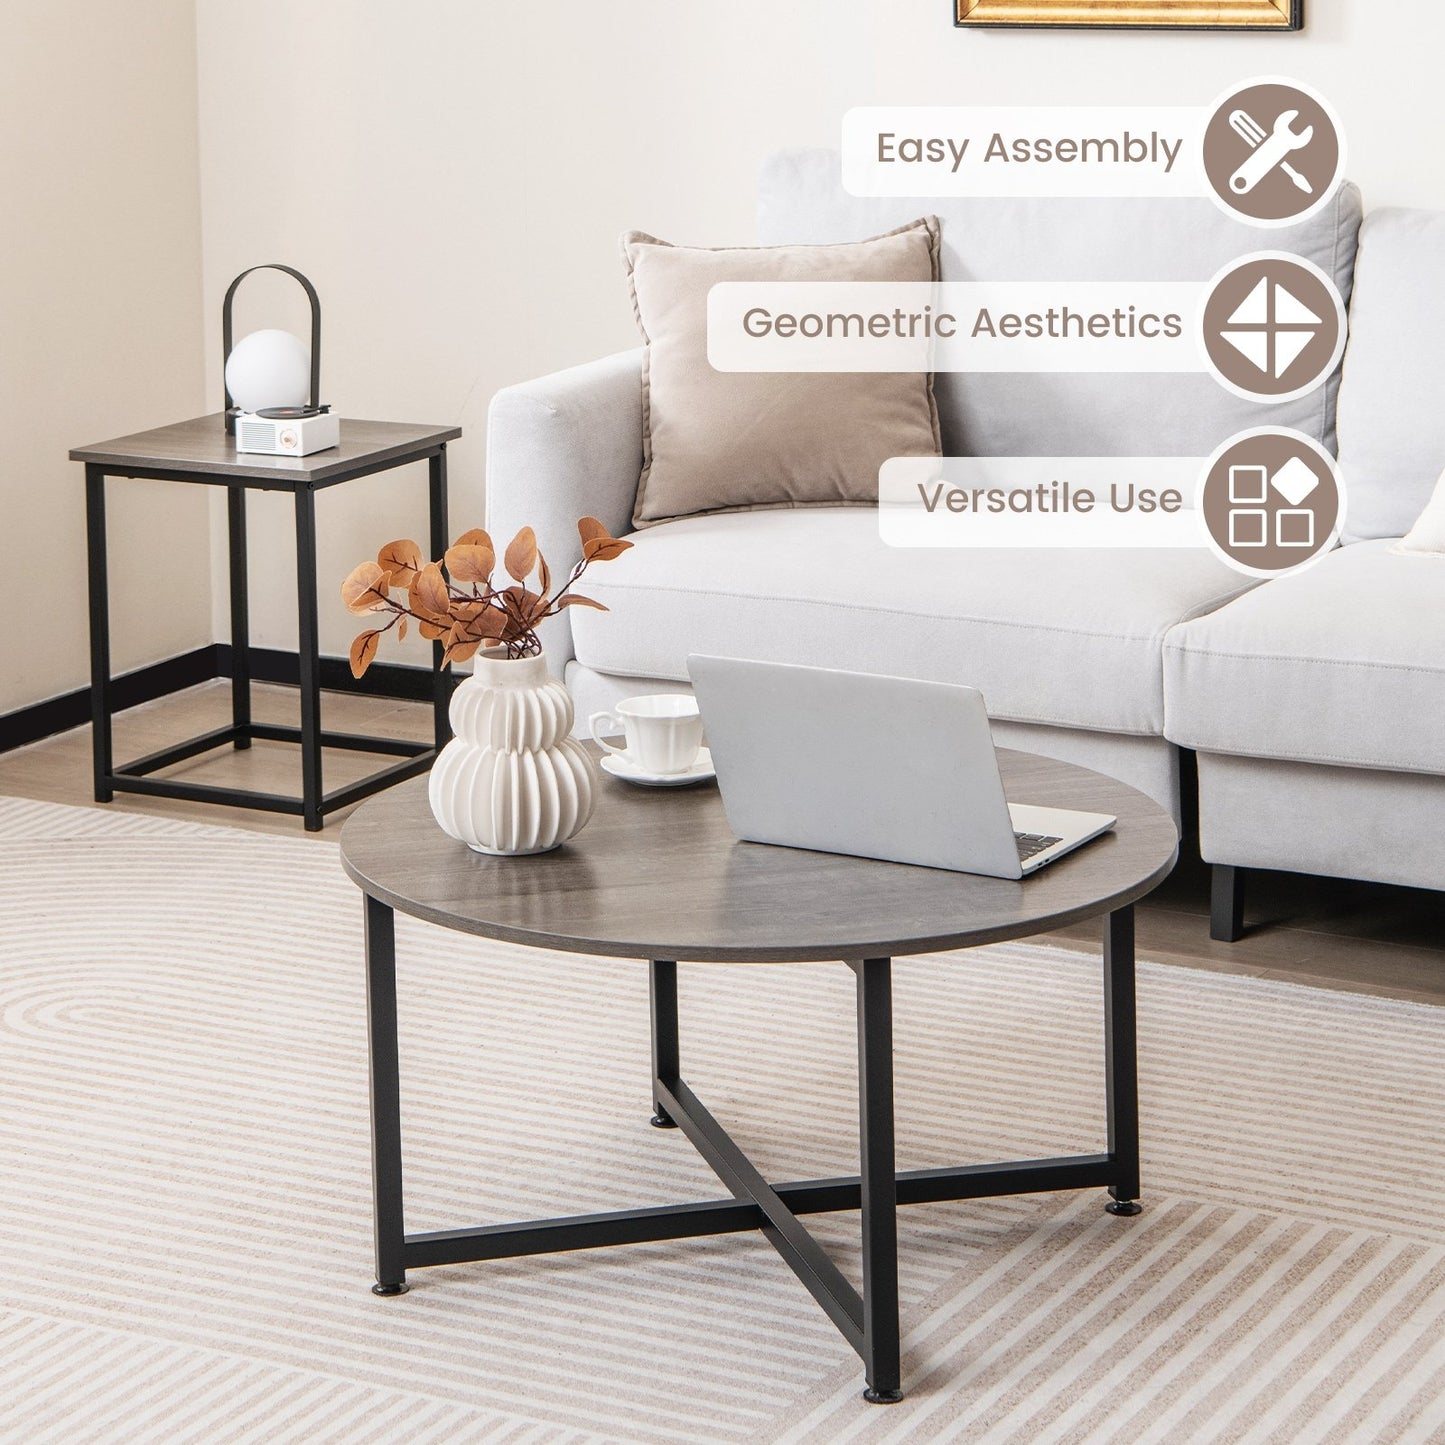 3-Piece Coffee Table Set Round Coffee Table and 2PCS Square End Tables, Gray